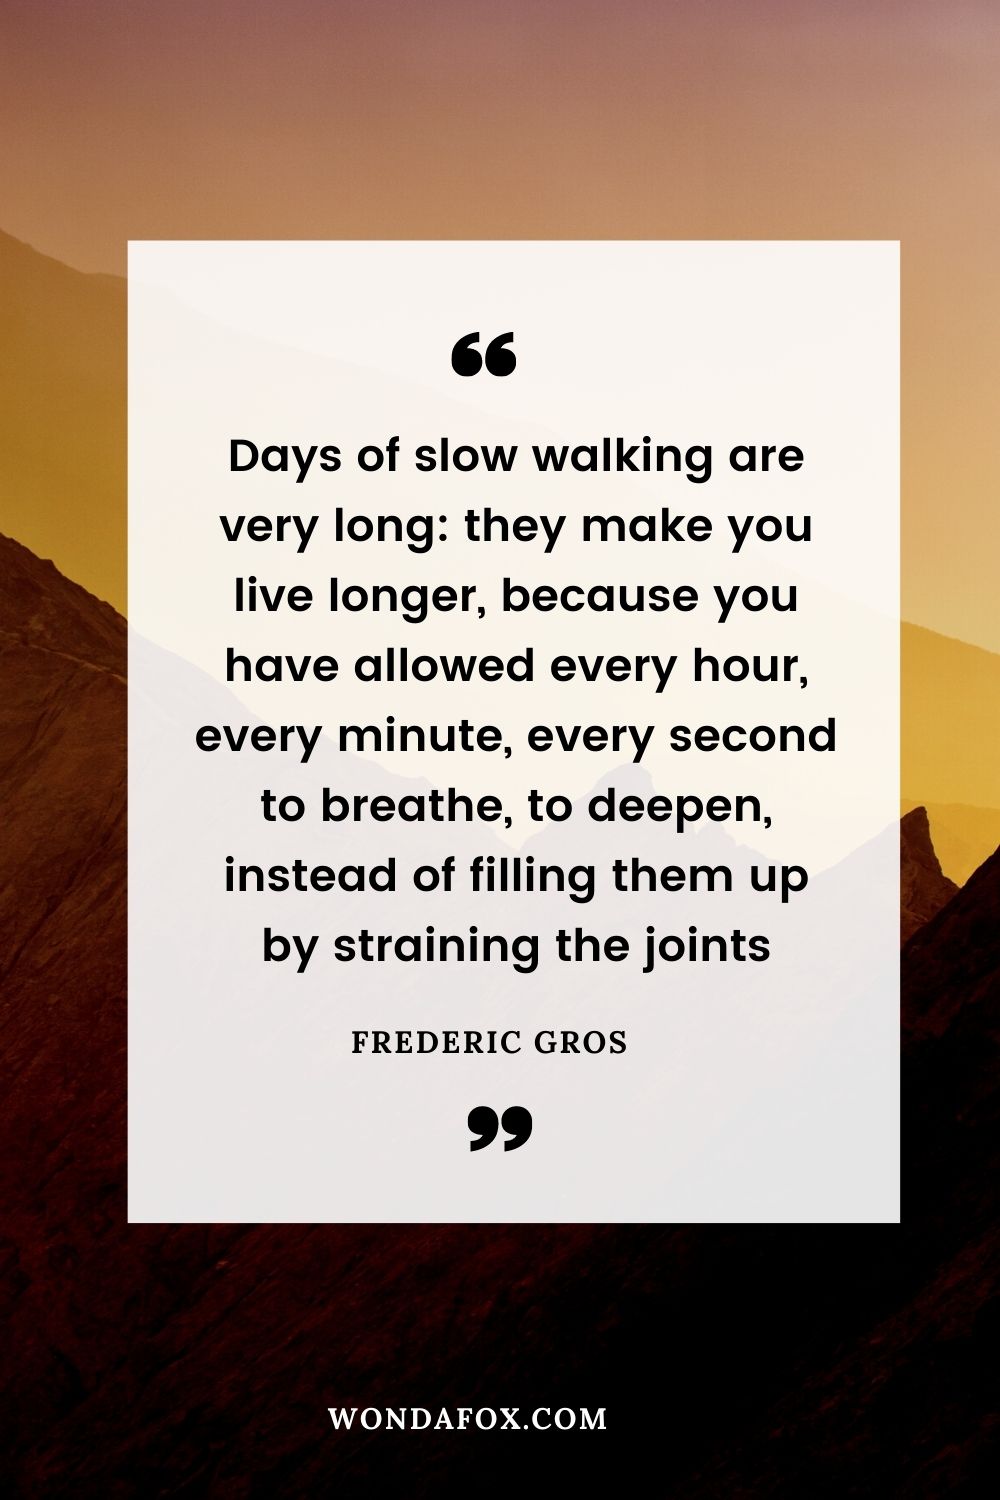 Days of slow walking are very long: they make you live longer, because you have allowed every hour, every minute, every second to breathe, to deepen, instead of filling them up by straining the joints